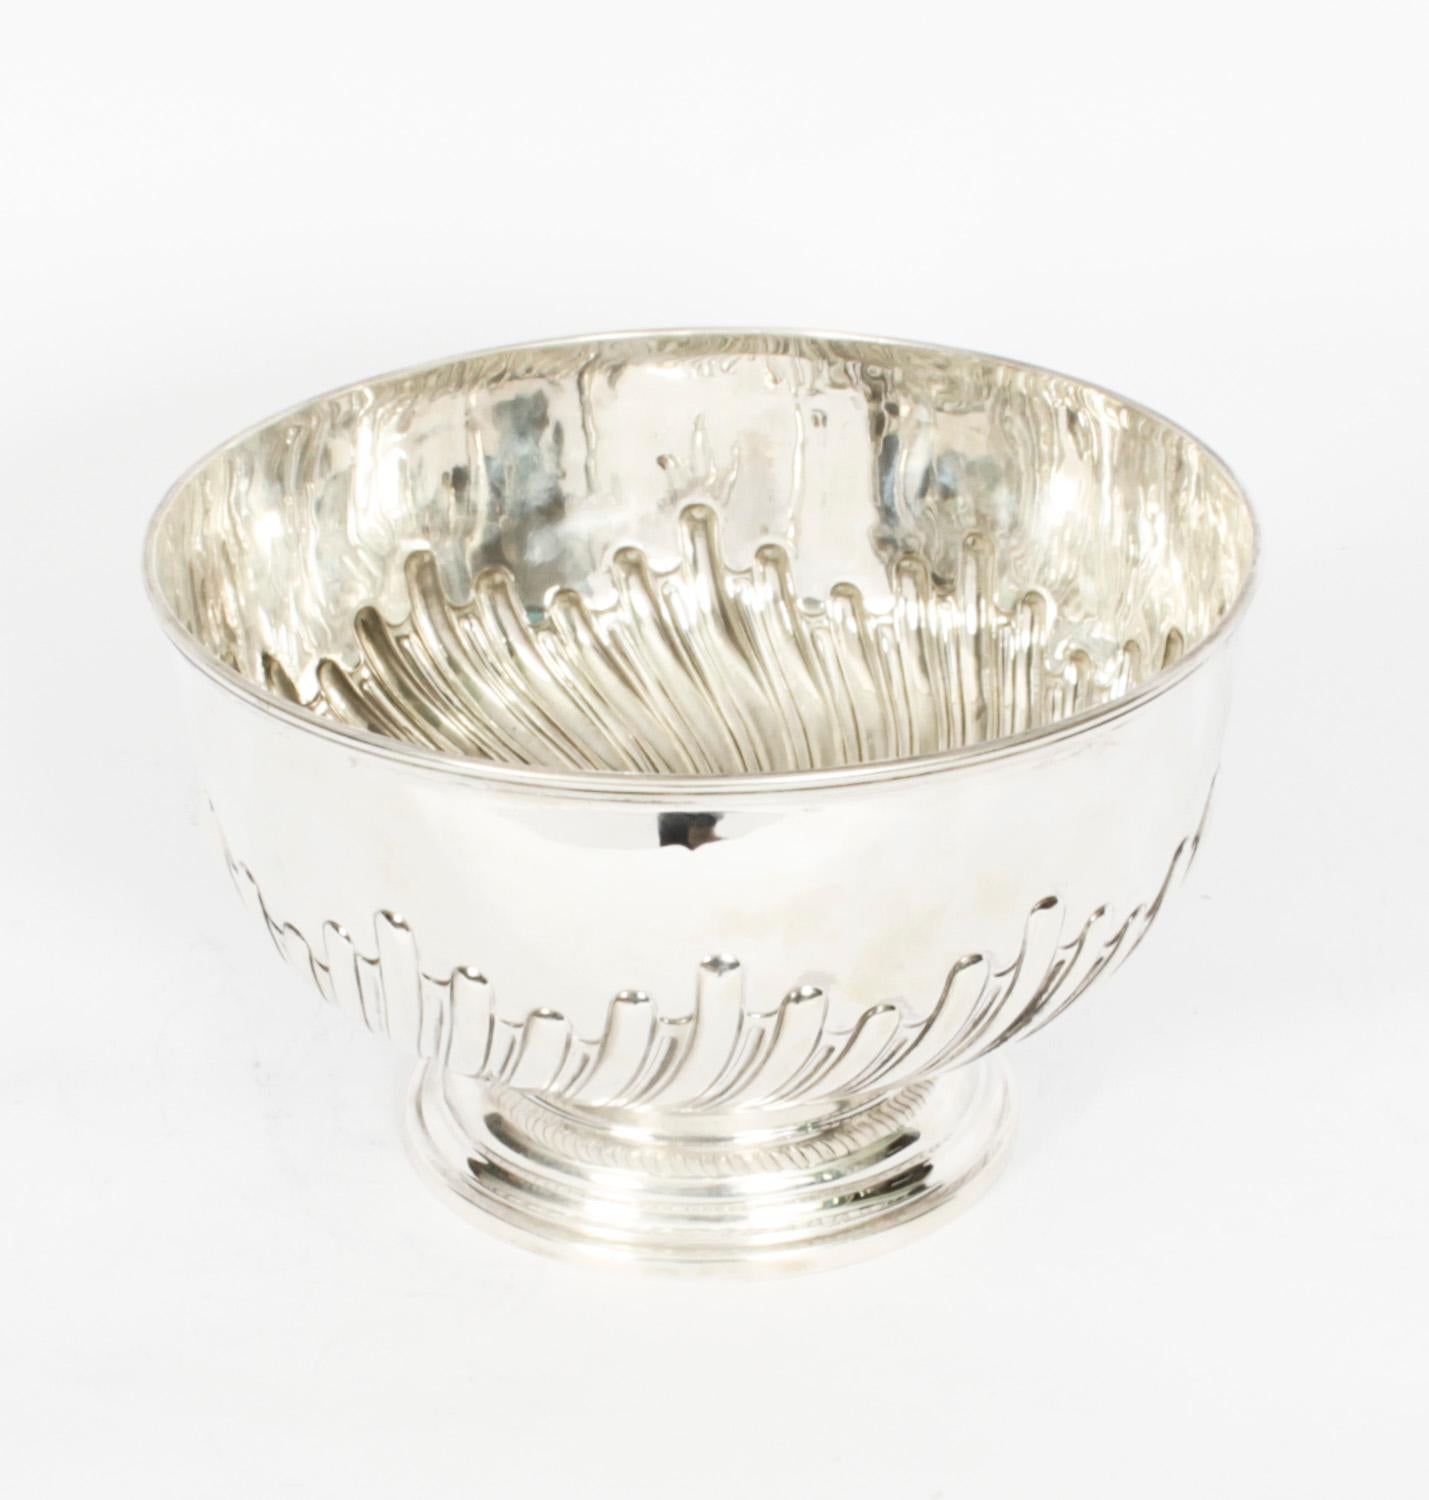 This is a large gorgeous antique Victorian sterling silver punch bowl bearing the makers mark of the renowned silversmiths Walker & Hall and hallmarks for Sheffield 1893.
 
This exquisite punch bowl is also ideal as a champagne cooler and it has